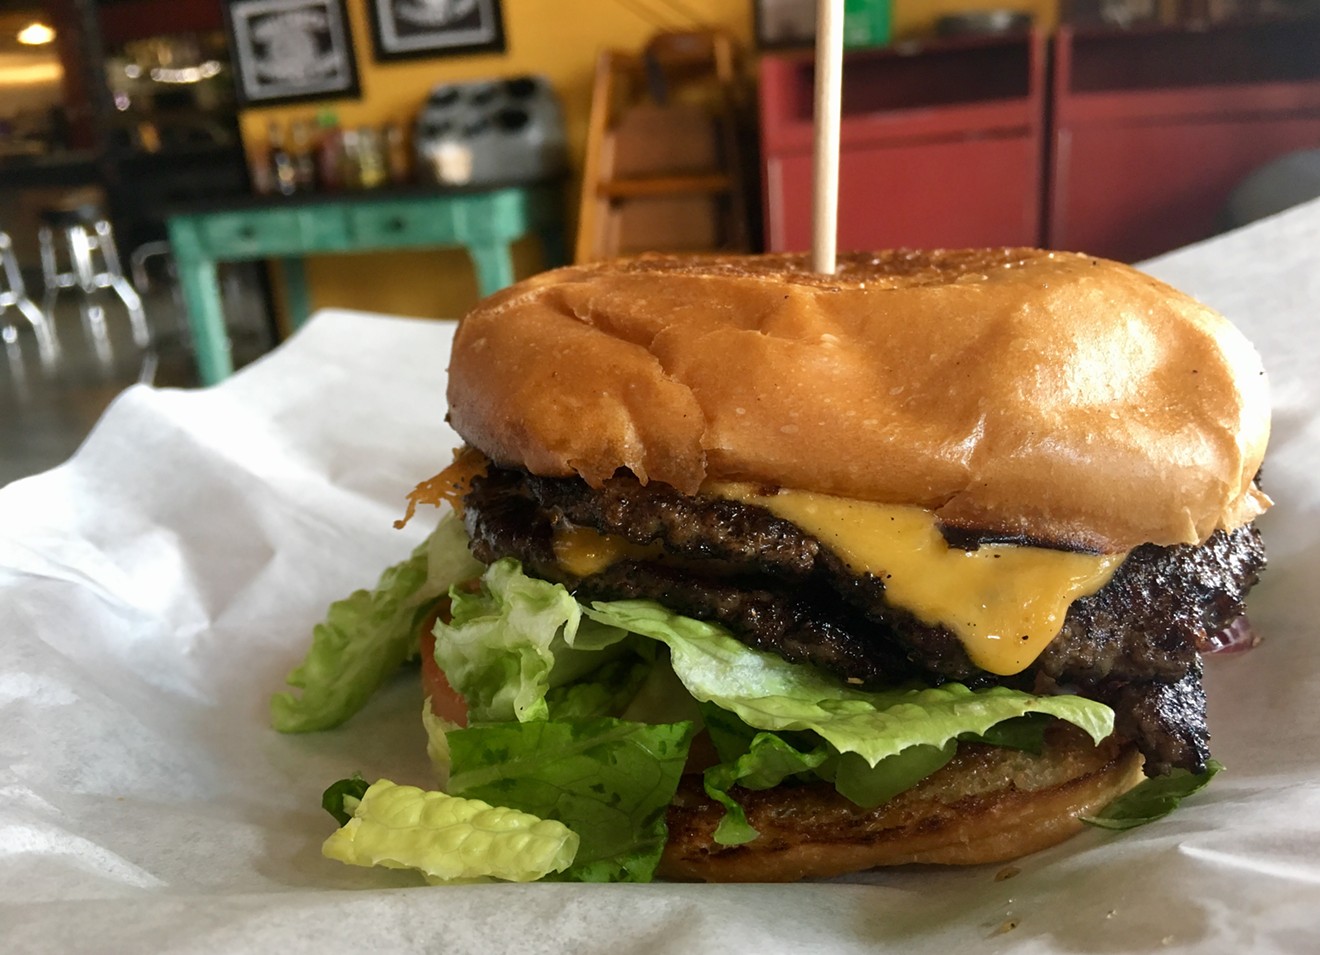 A double cheeseburger at Deep Ellum's Uncle Uber's with lettuce, onion, cheddar and a pickle costs less than 8 bucks.